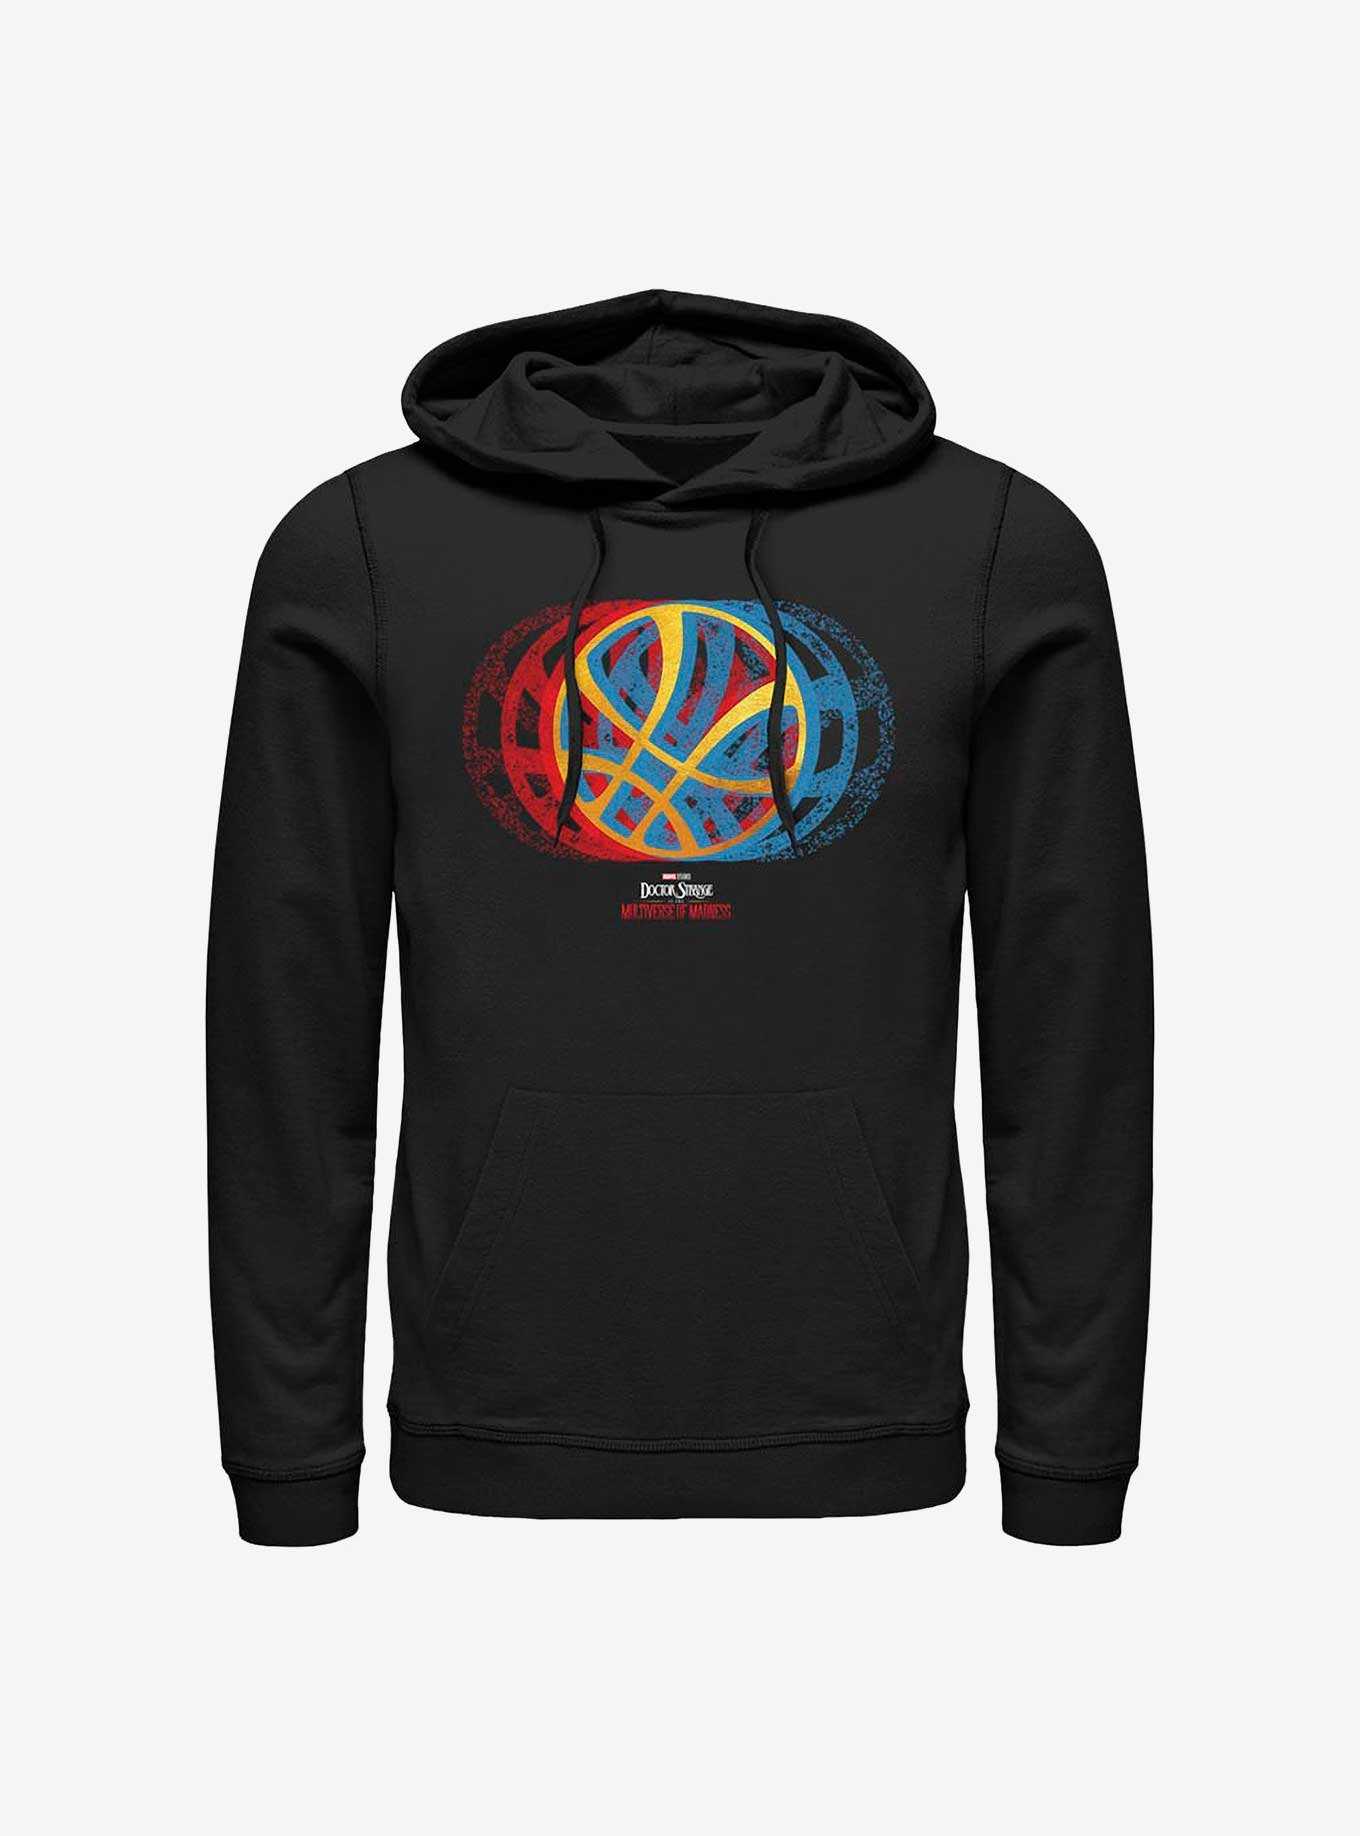 Marvel Doctor Strange In The Multiverse Of Madness Gradient Seal Hoodie, , hi-res